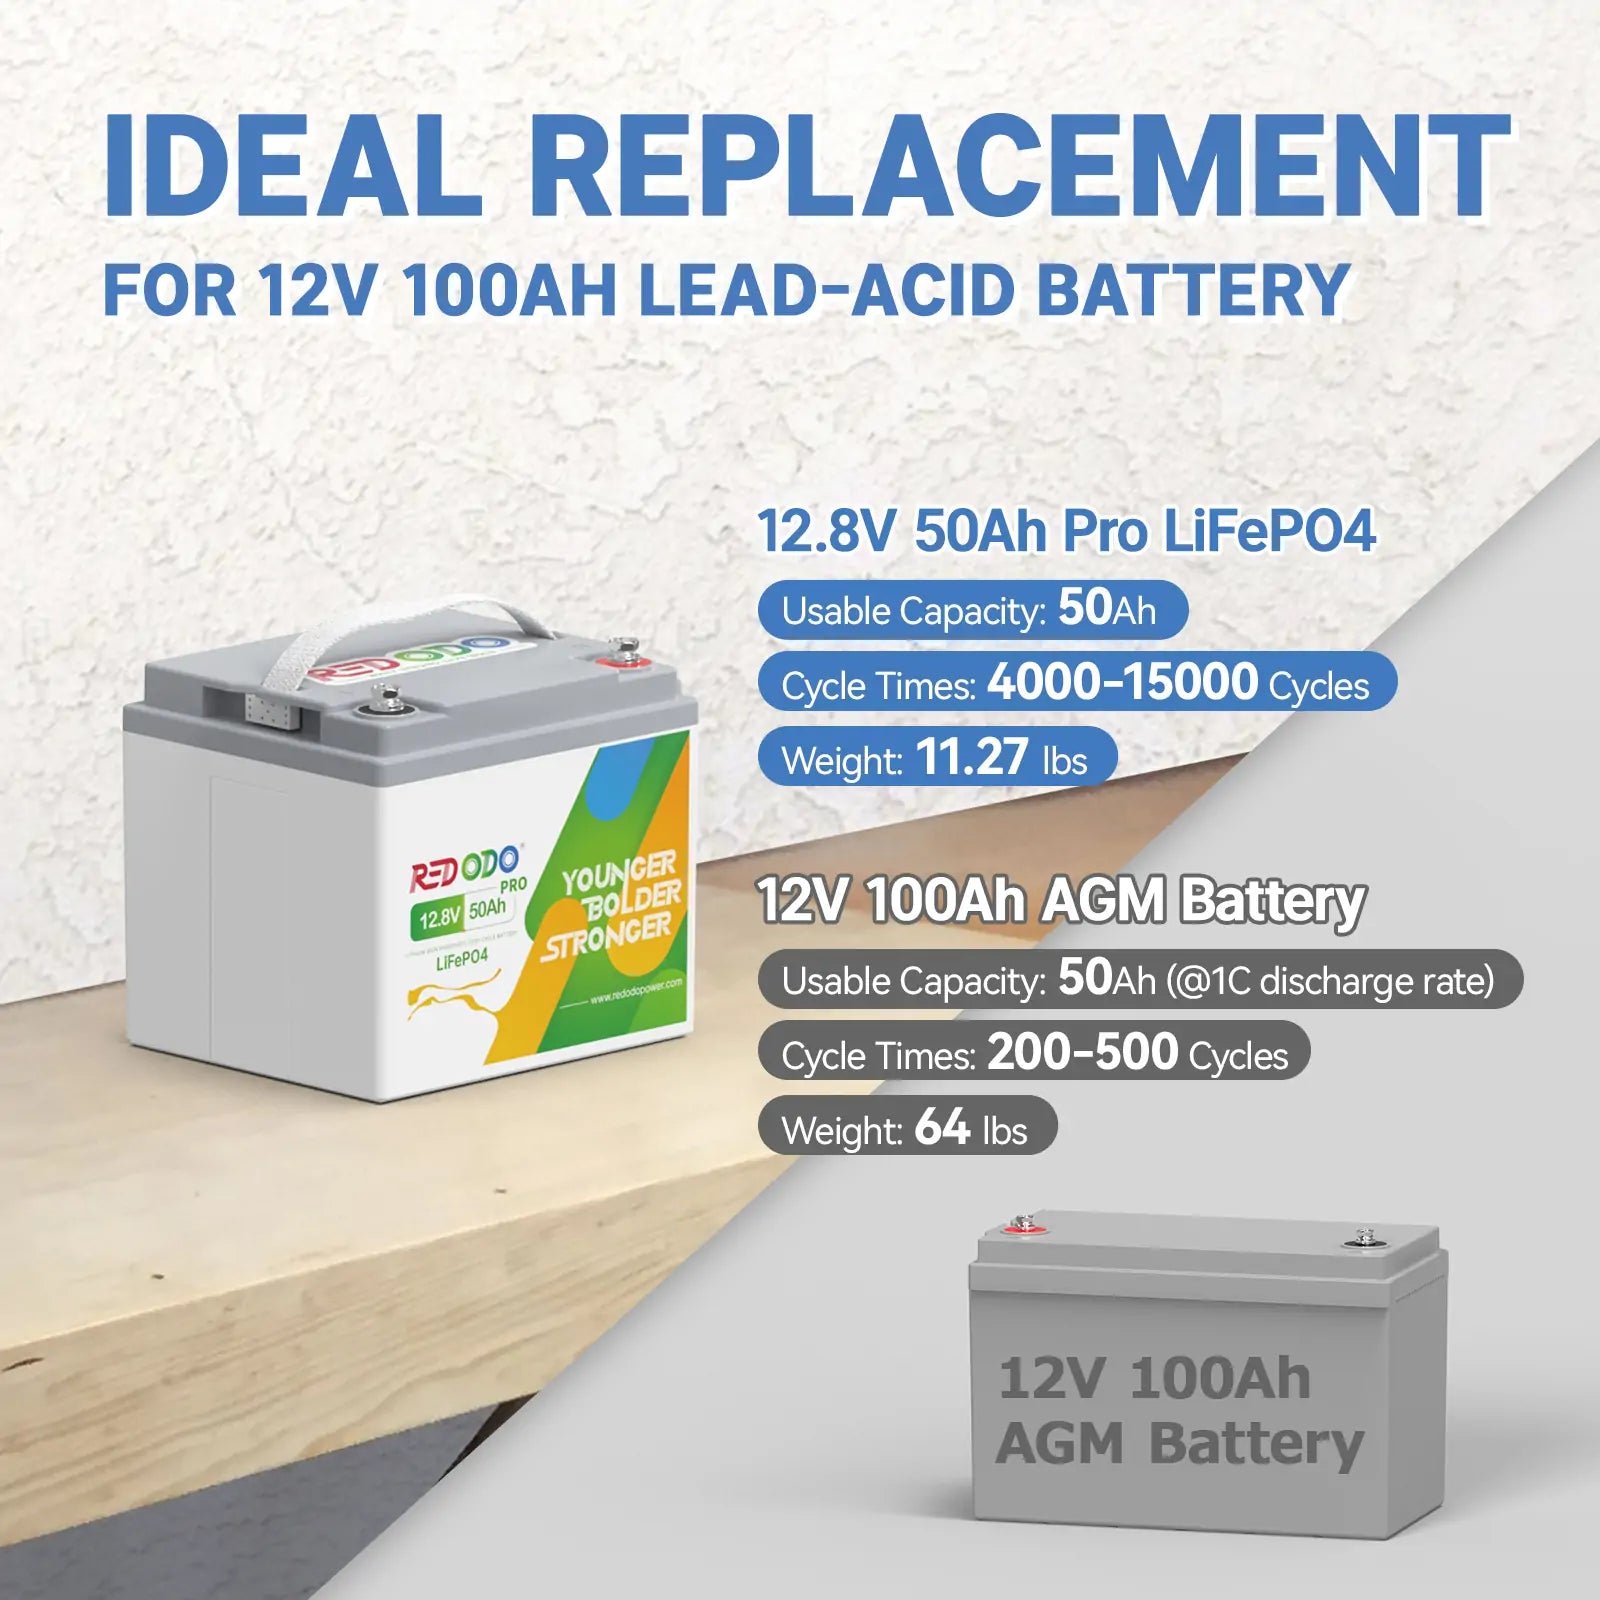 【Only $152】Redodo 12V 50Ah Pro LiFePO4 Battery | 640Wh & 640W